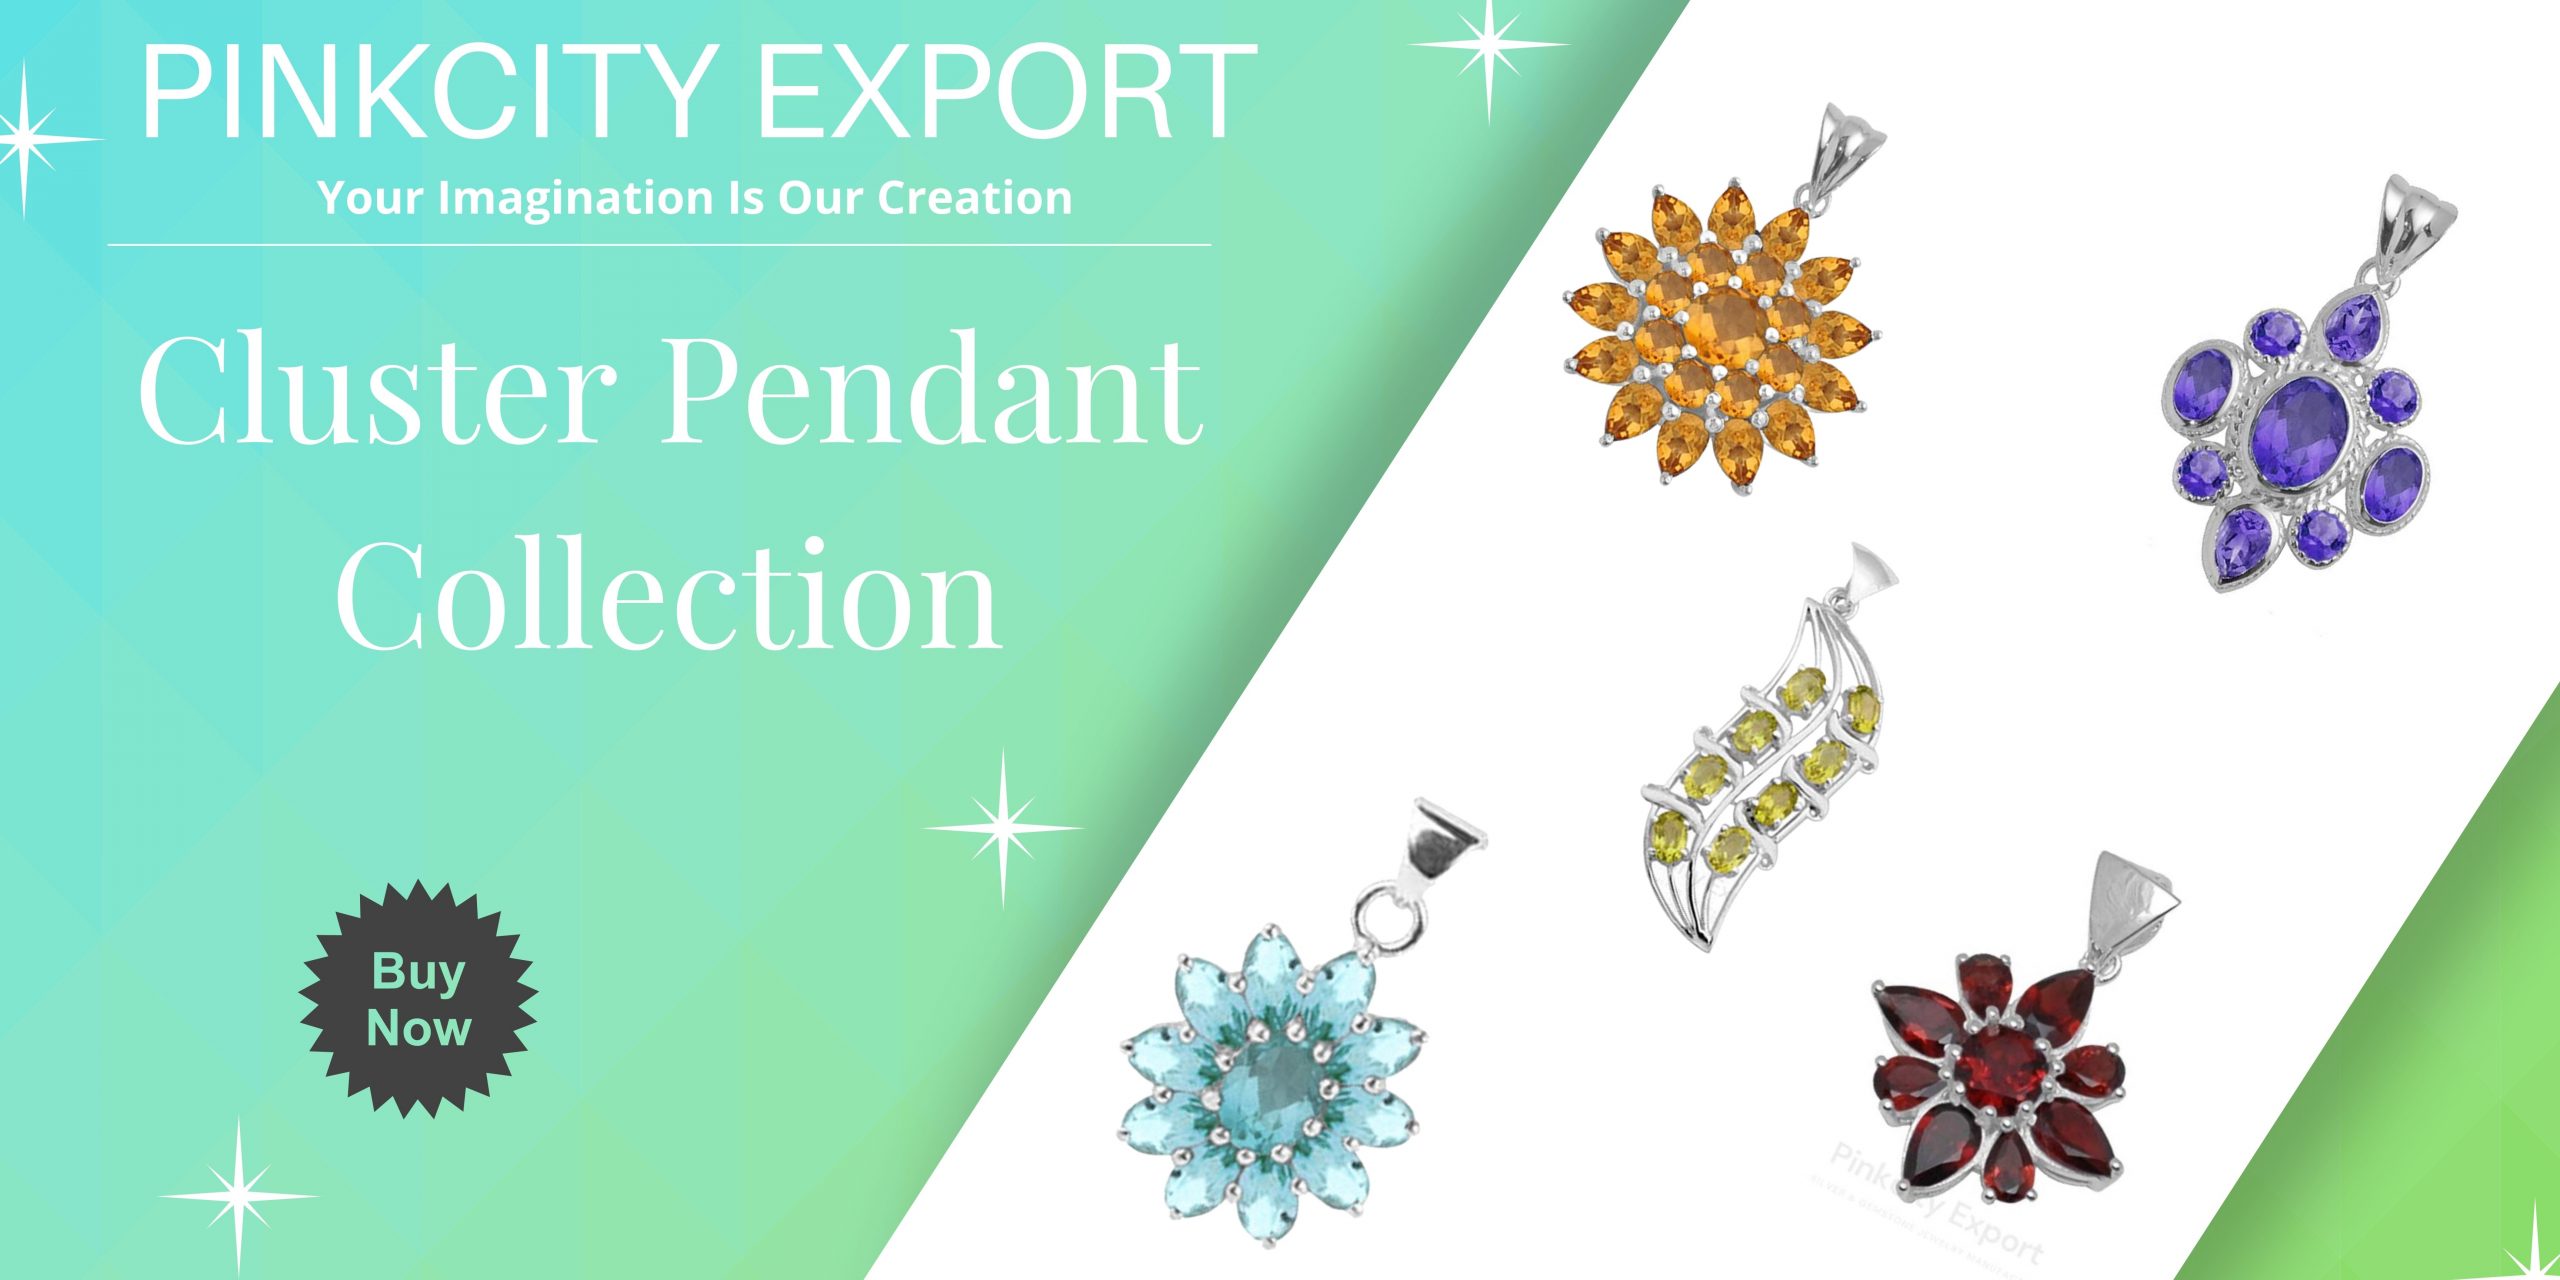 Cluster Pendent Collection